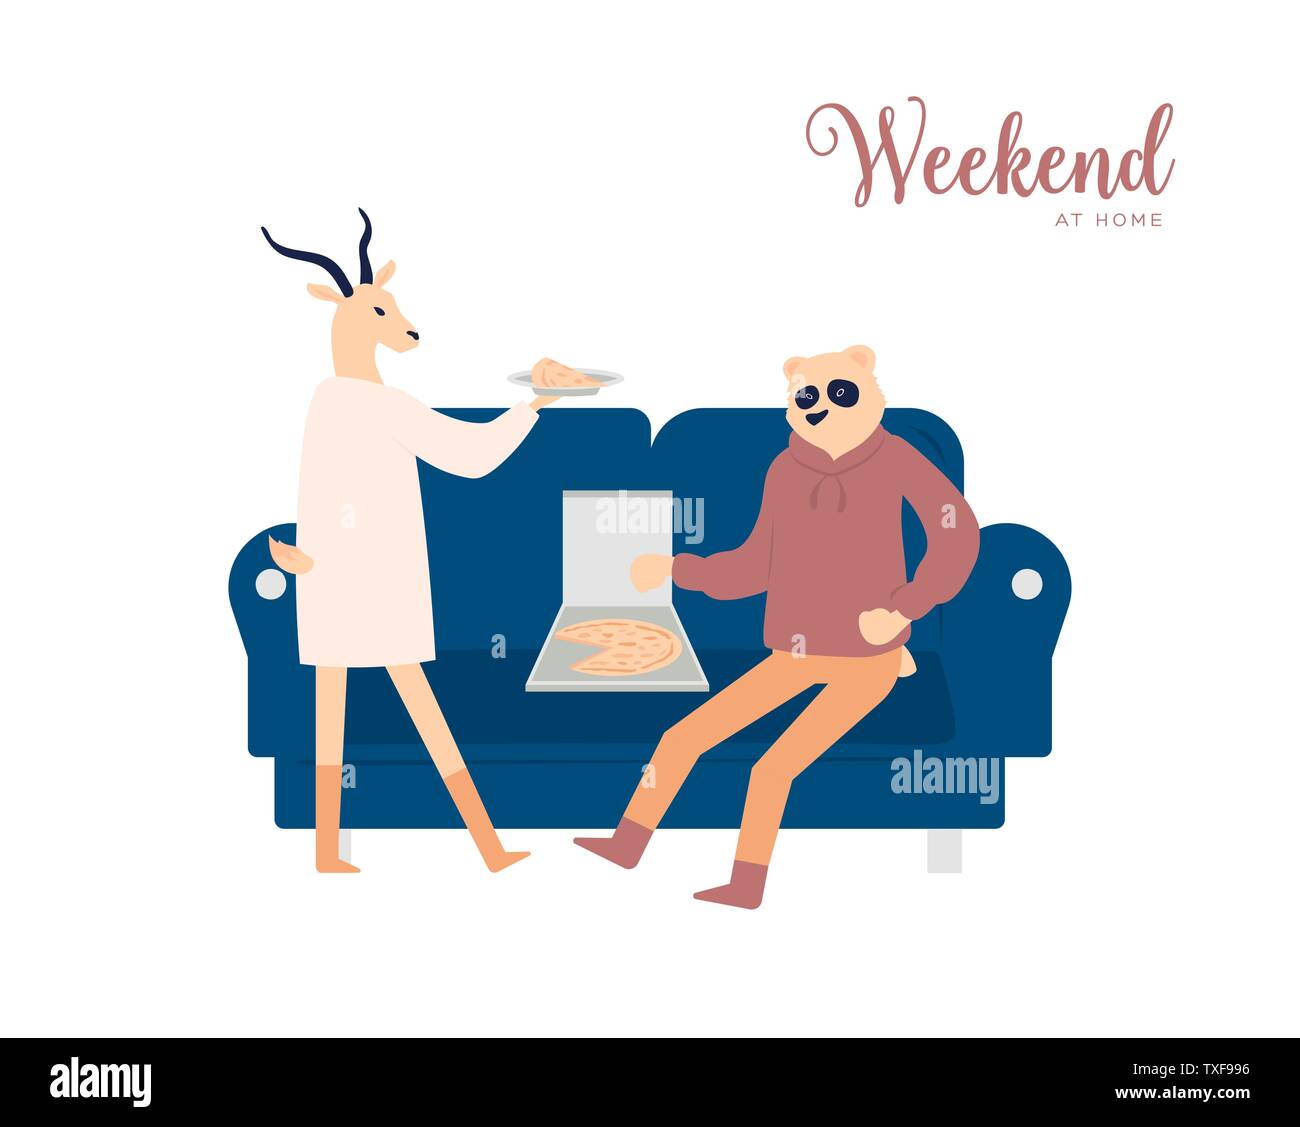 Couple having weekend at home vector poster concept. Boyfriend and girlfriend eating pizza on sofa isolated clipart. Wife and husband flat characters. Humanized animals friends spending time together Stock Vector